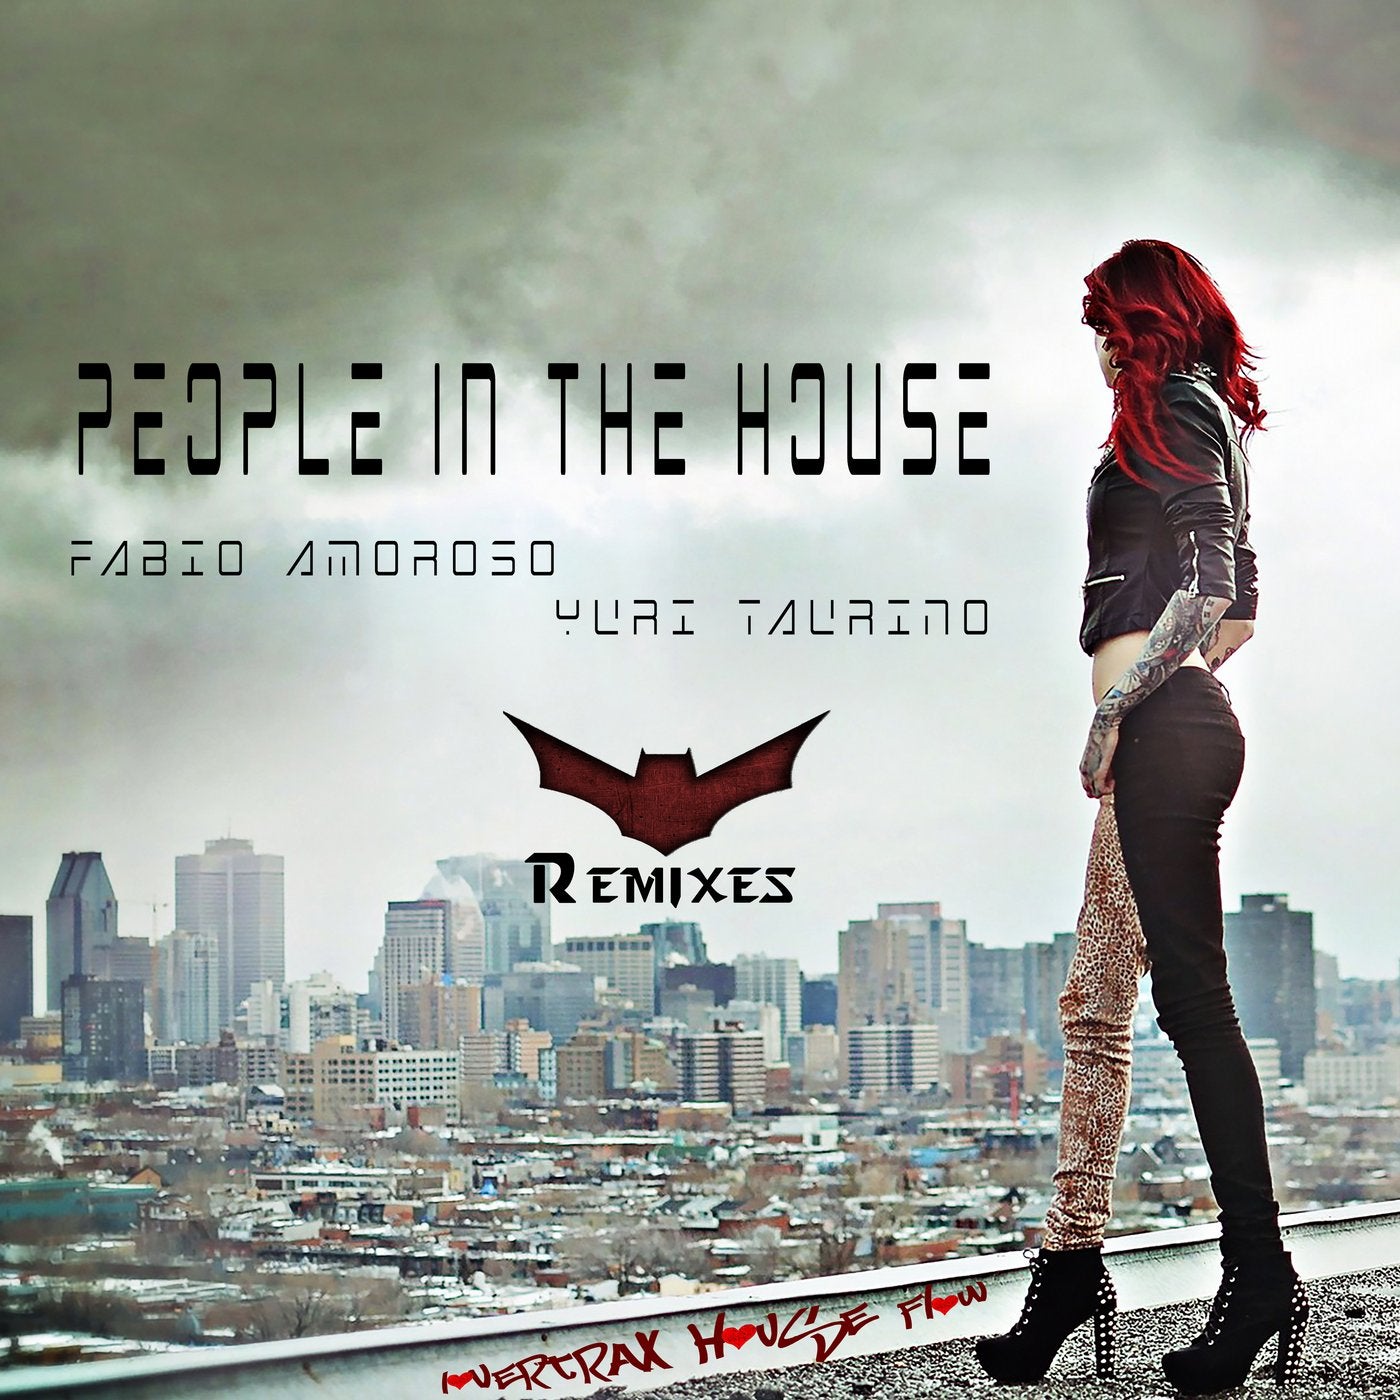 House ремикс. Музыка the people in the House.